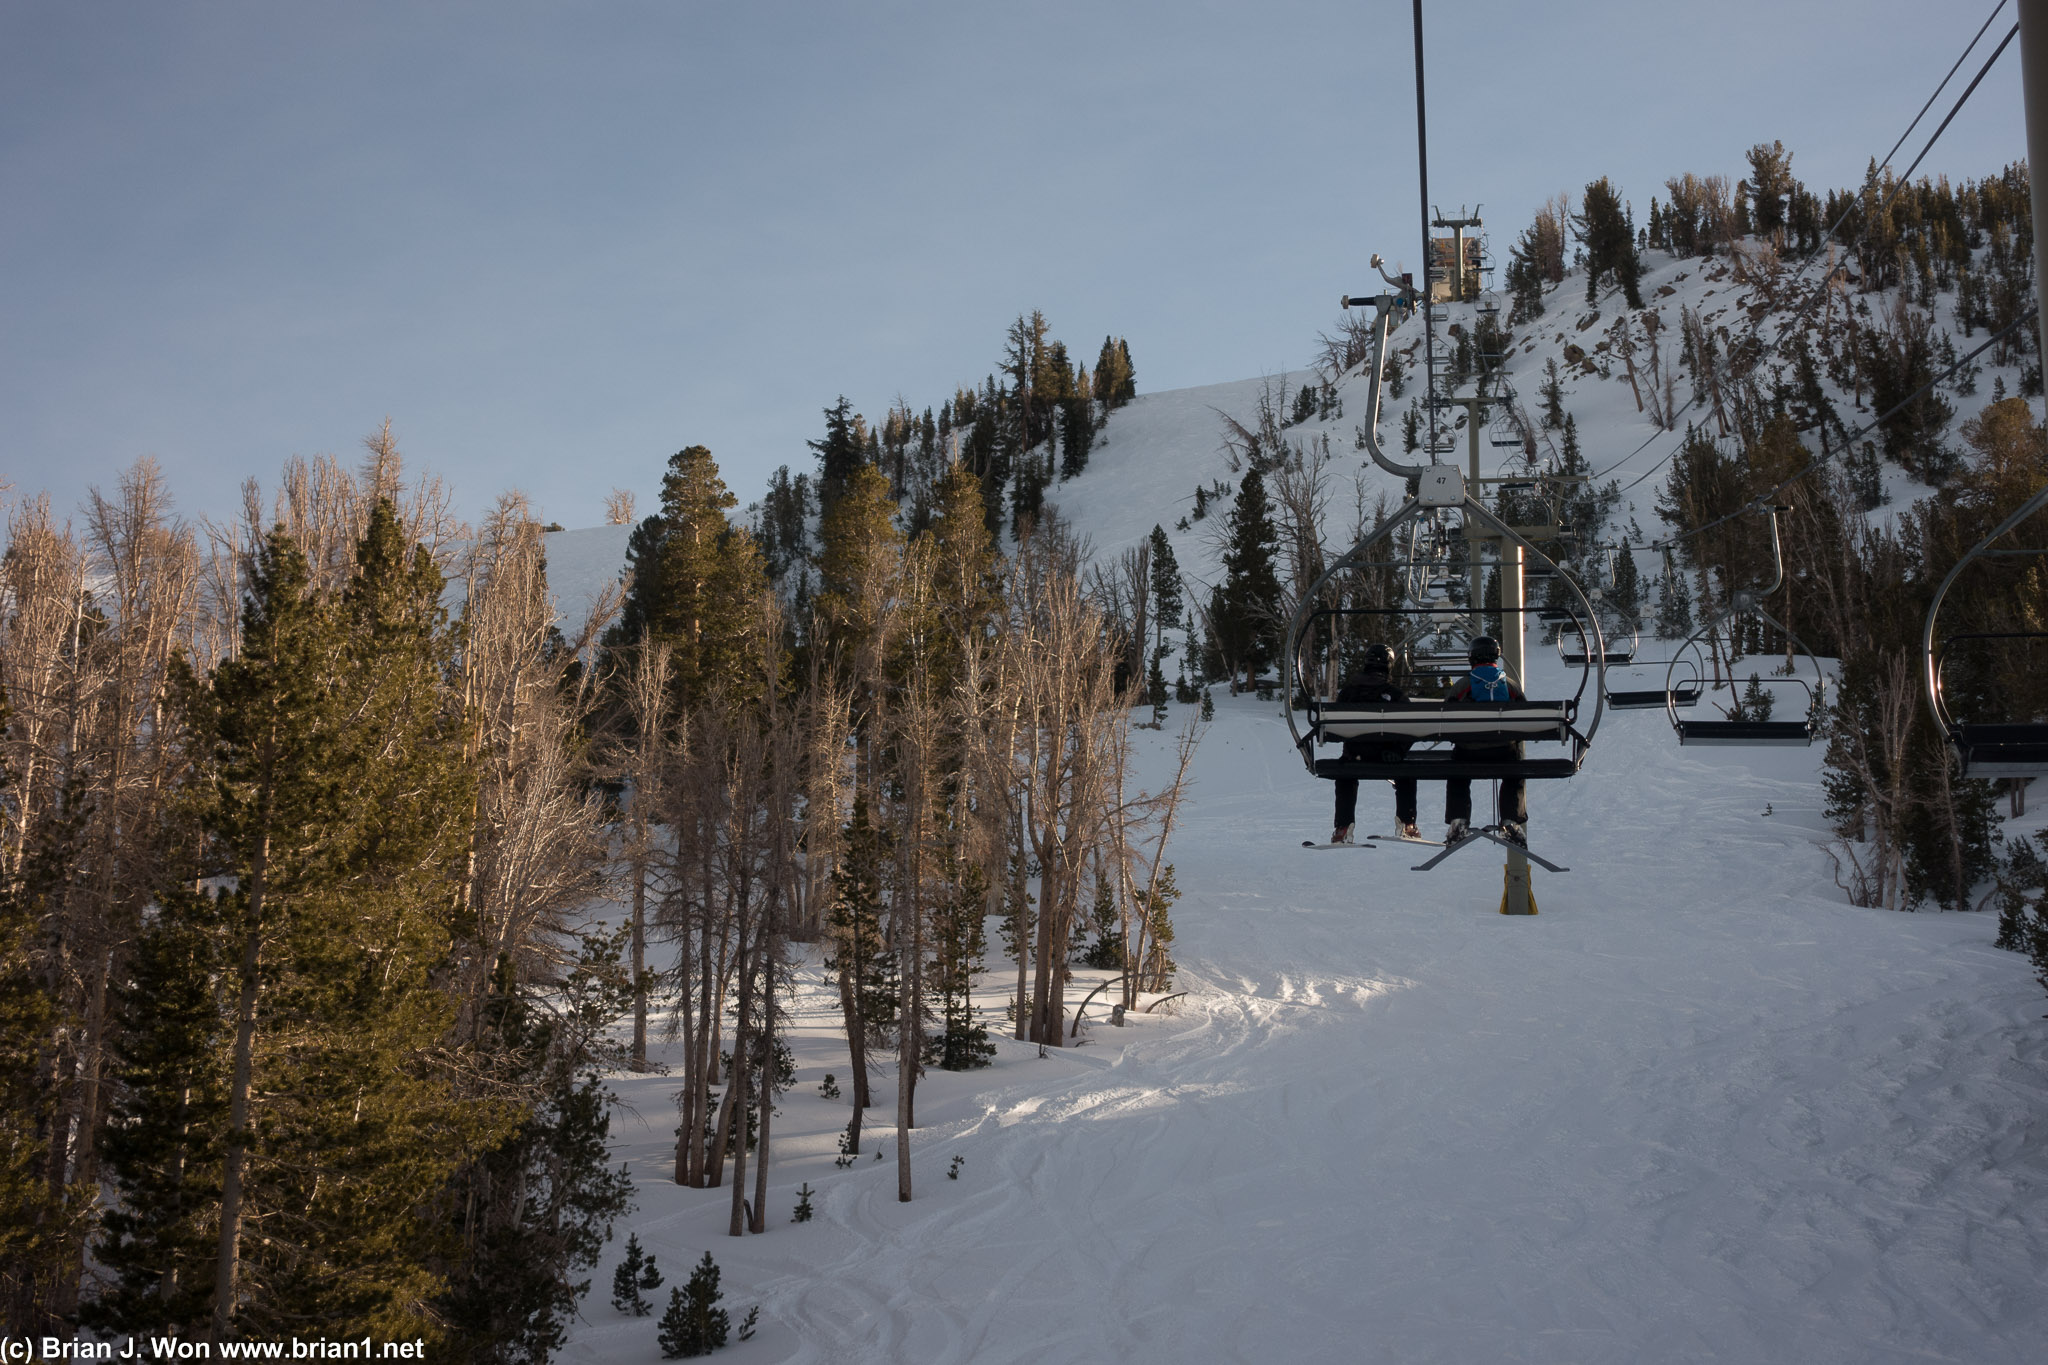 June Mountain is mostly old school, non-express ski lifts.